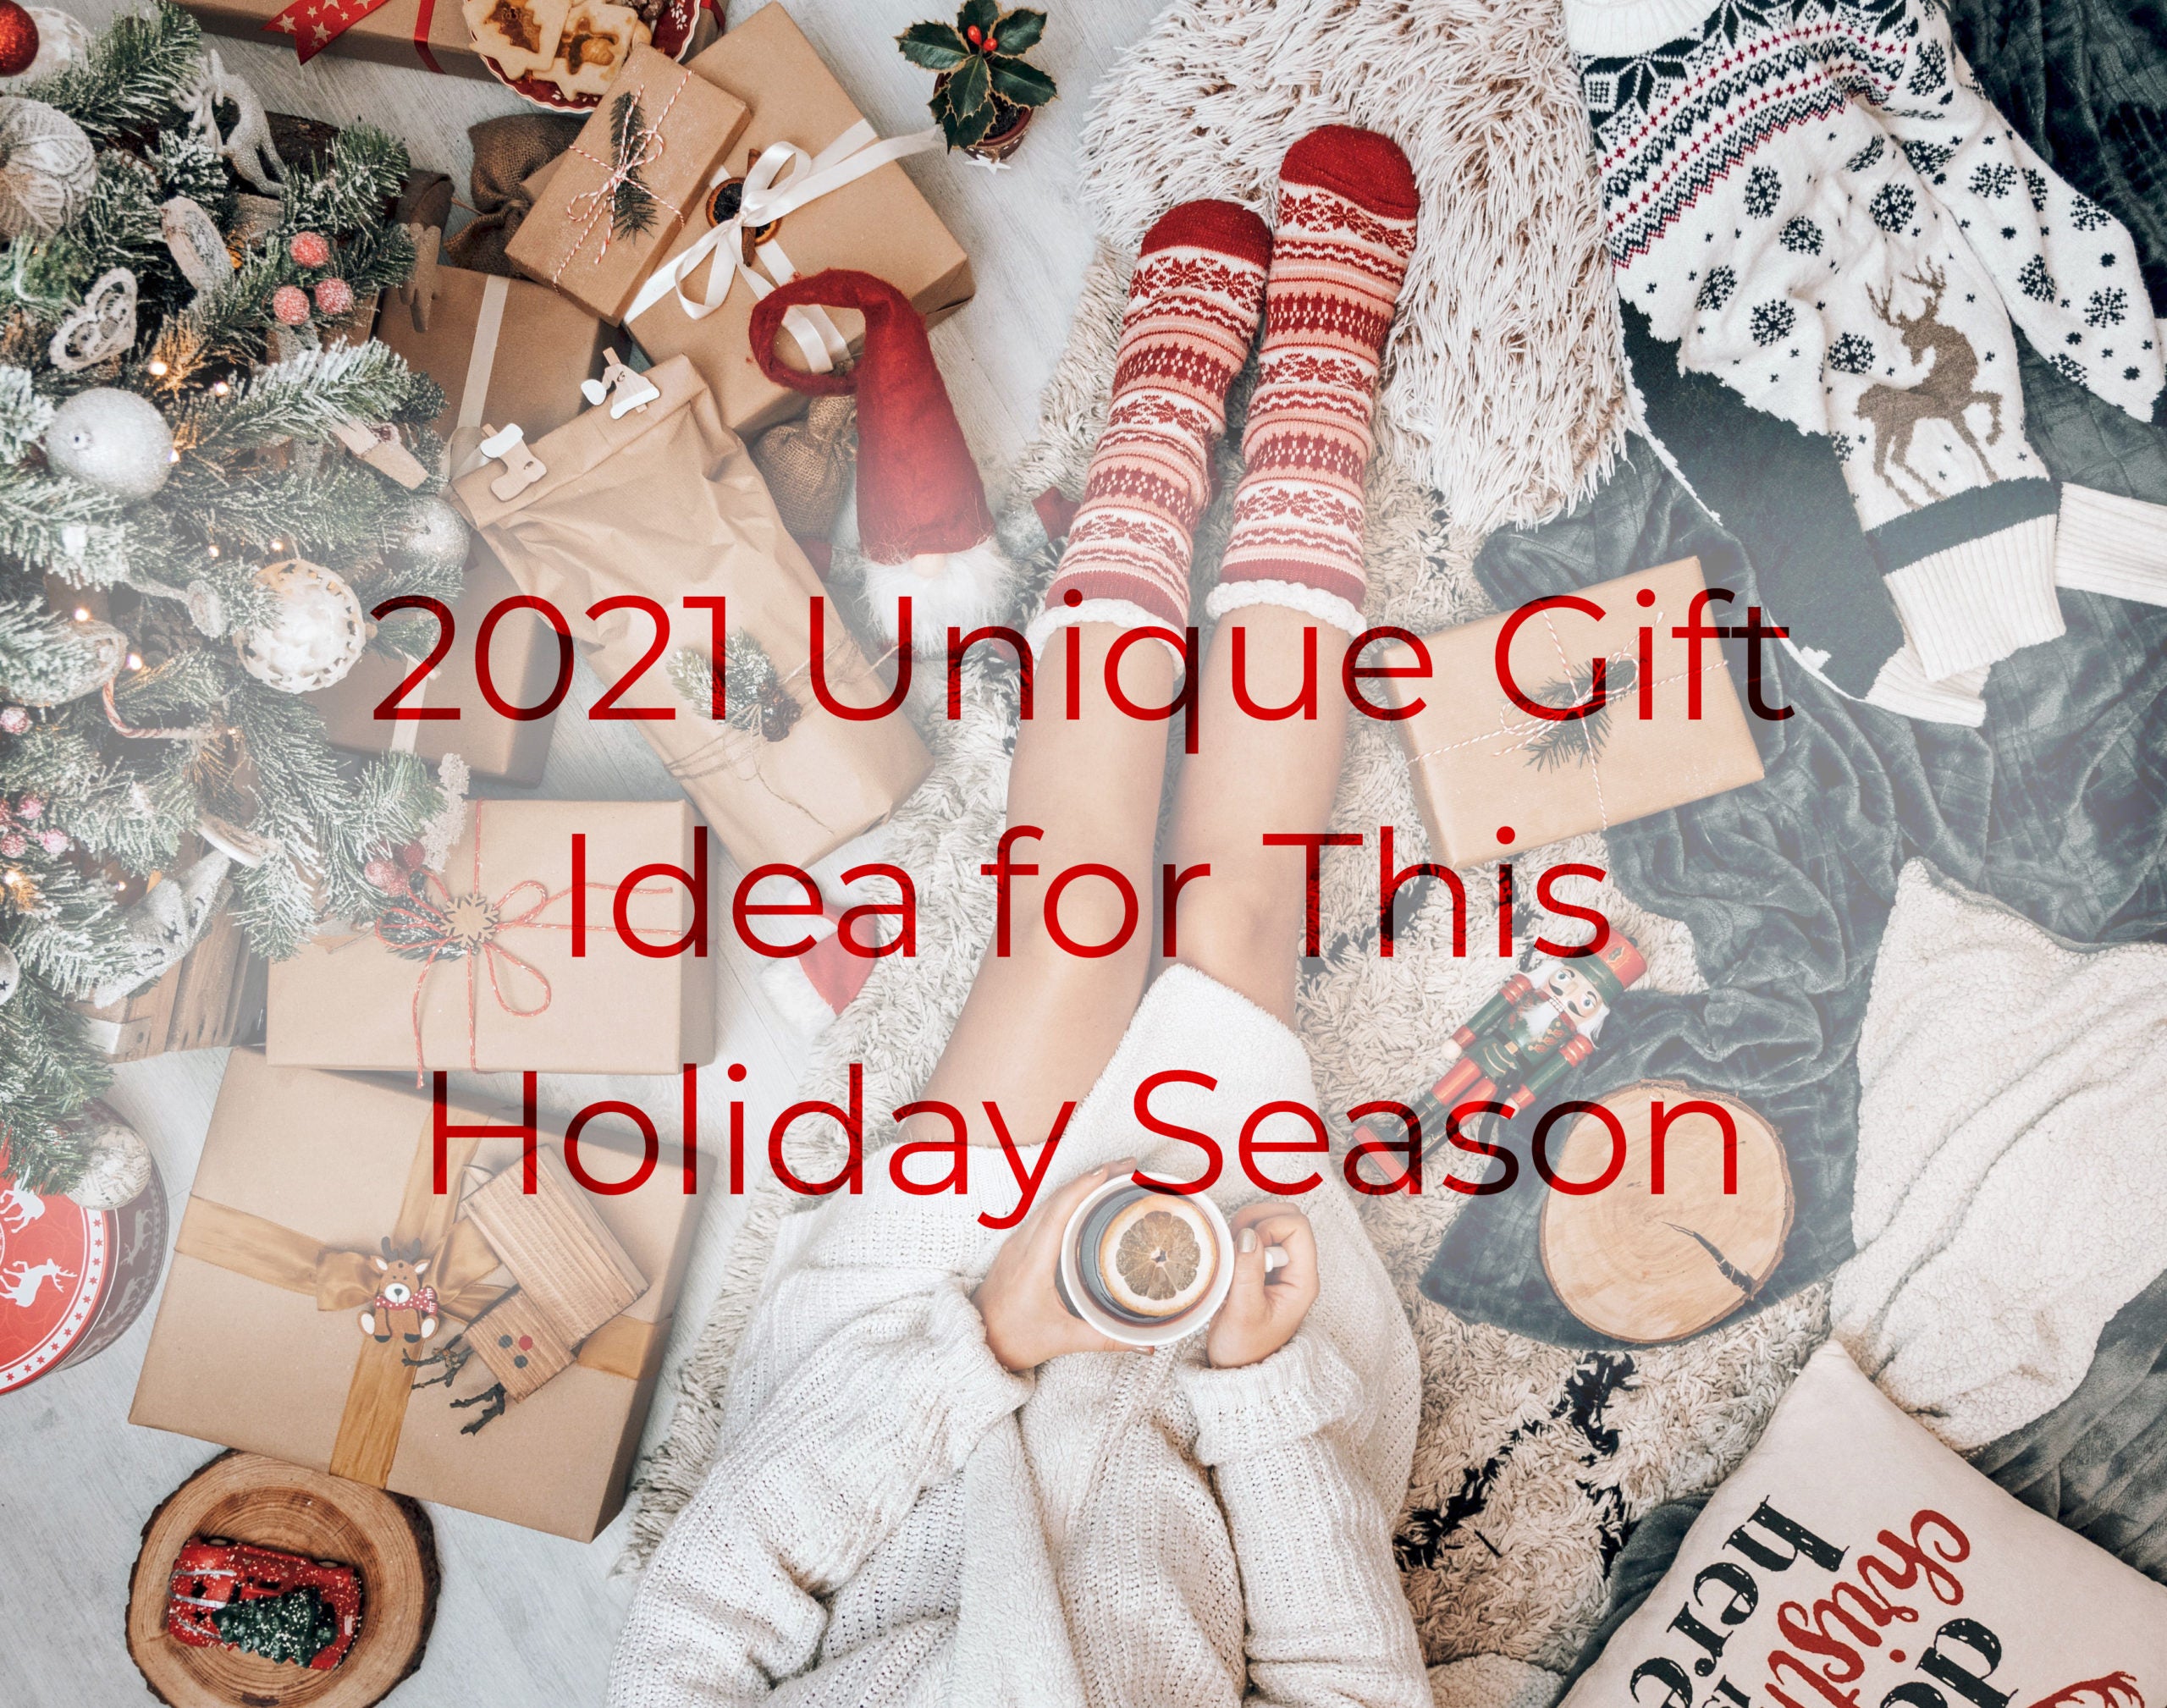 2021 Unique Gift Idea for This Holiday Season